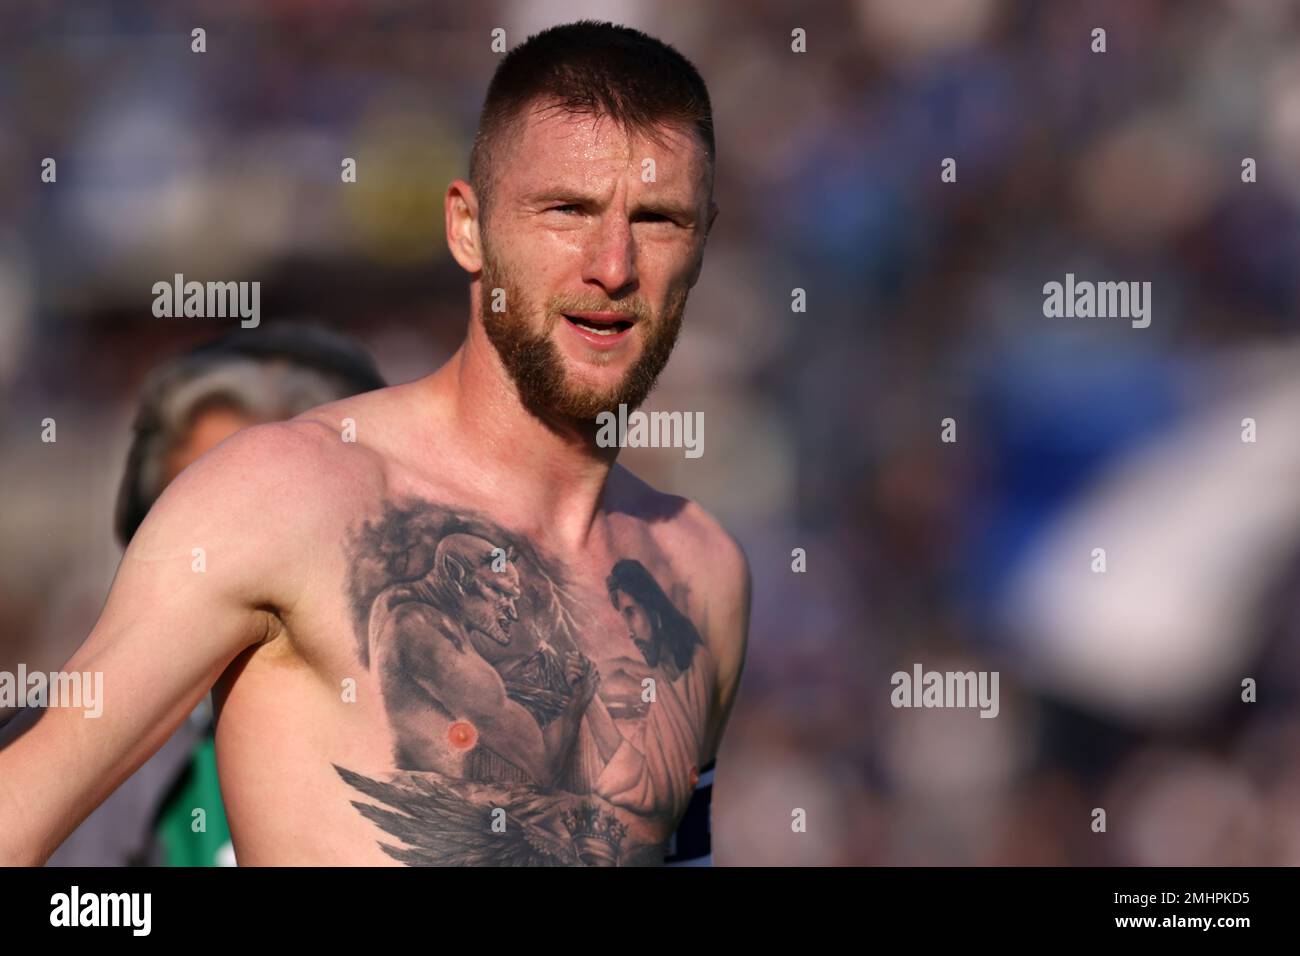 Bergamo, Italy, 13th November 2022. Milan Skriniar of FC Internazionale looks on after removing his jersey revealing a chest tattoo of Lucifer and Jesus Christ following the final whistle of the Serie A match at Gewiss Stadium, Bergamo. Picture credit should read: Jonathan Moscrop / Sportimage Stock Photo